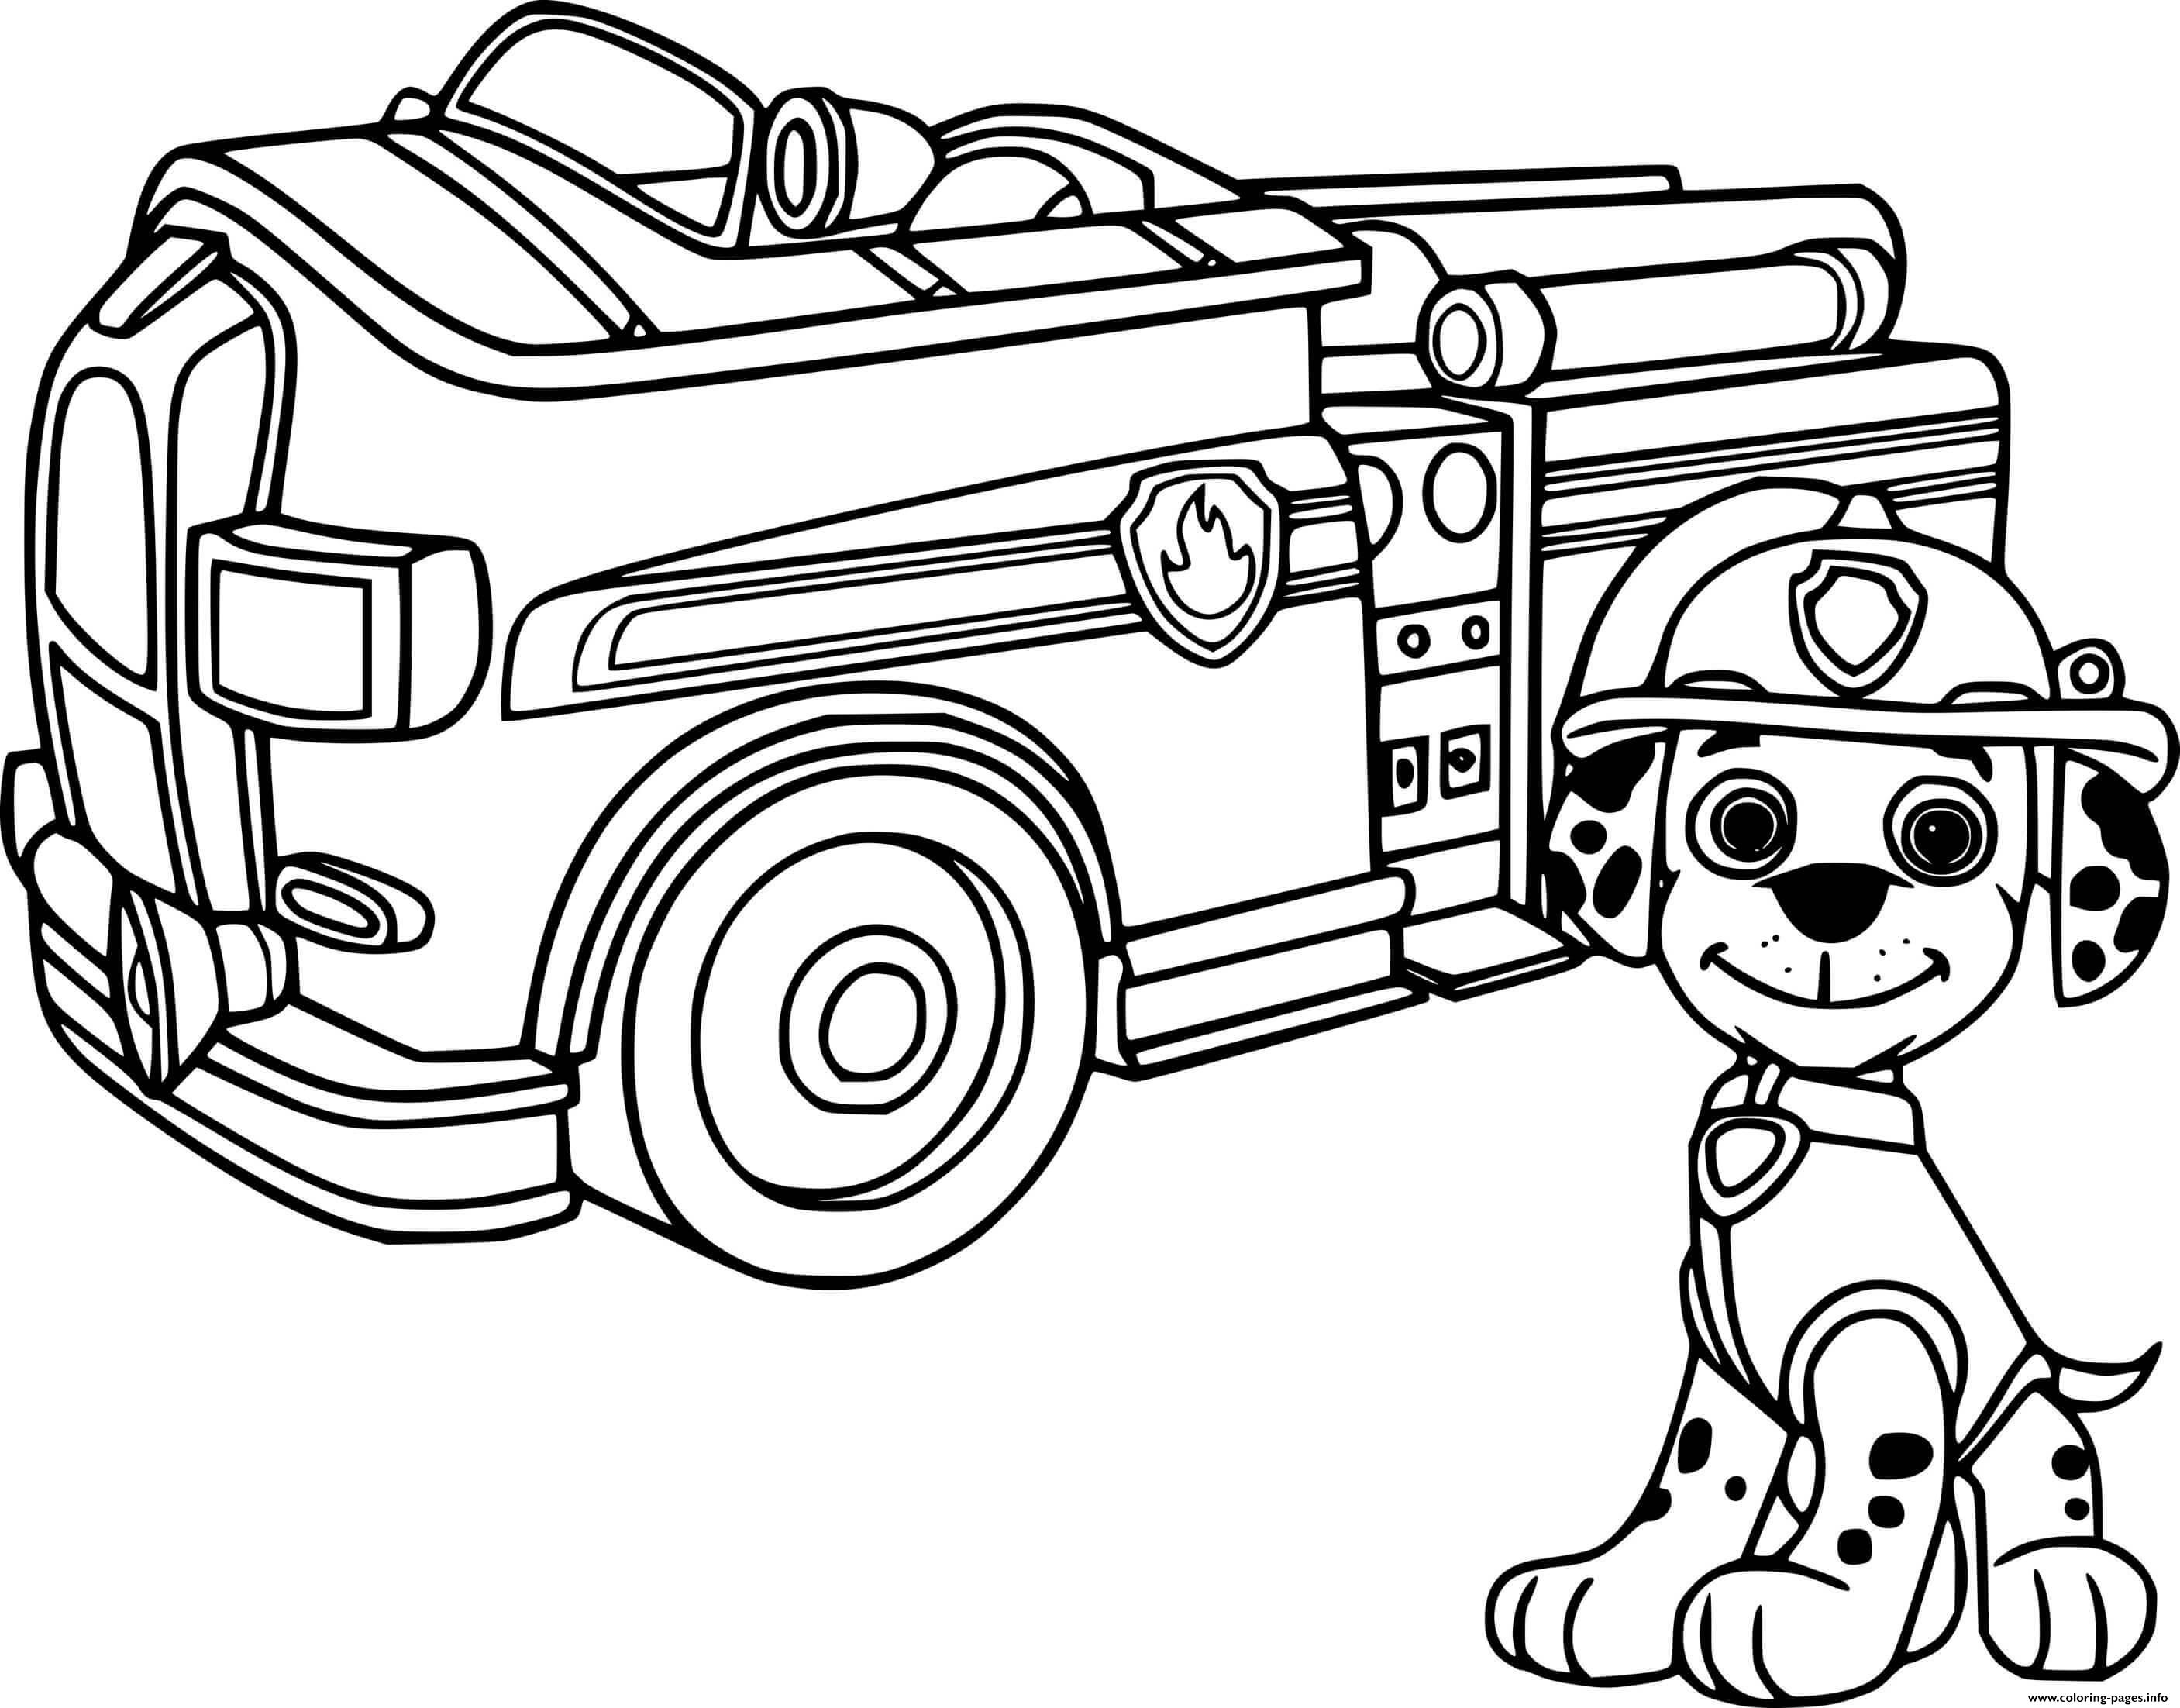 Marshall And His Fire Truck coloring